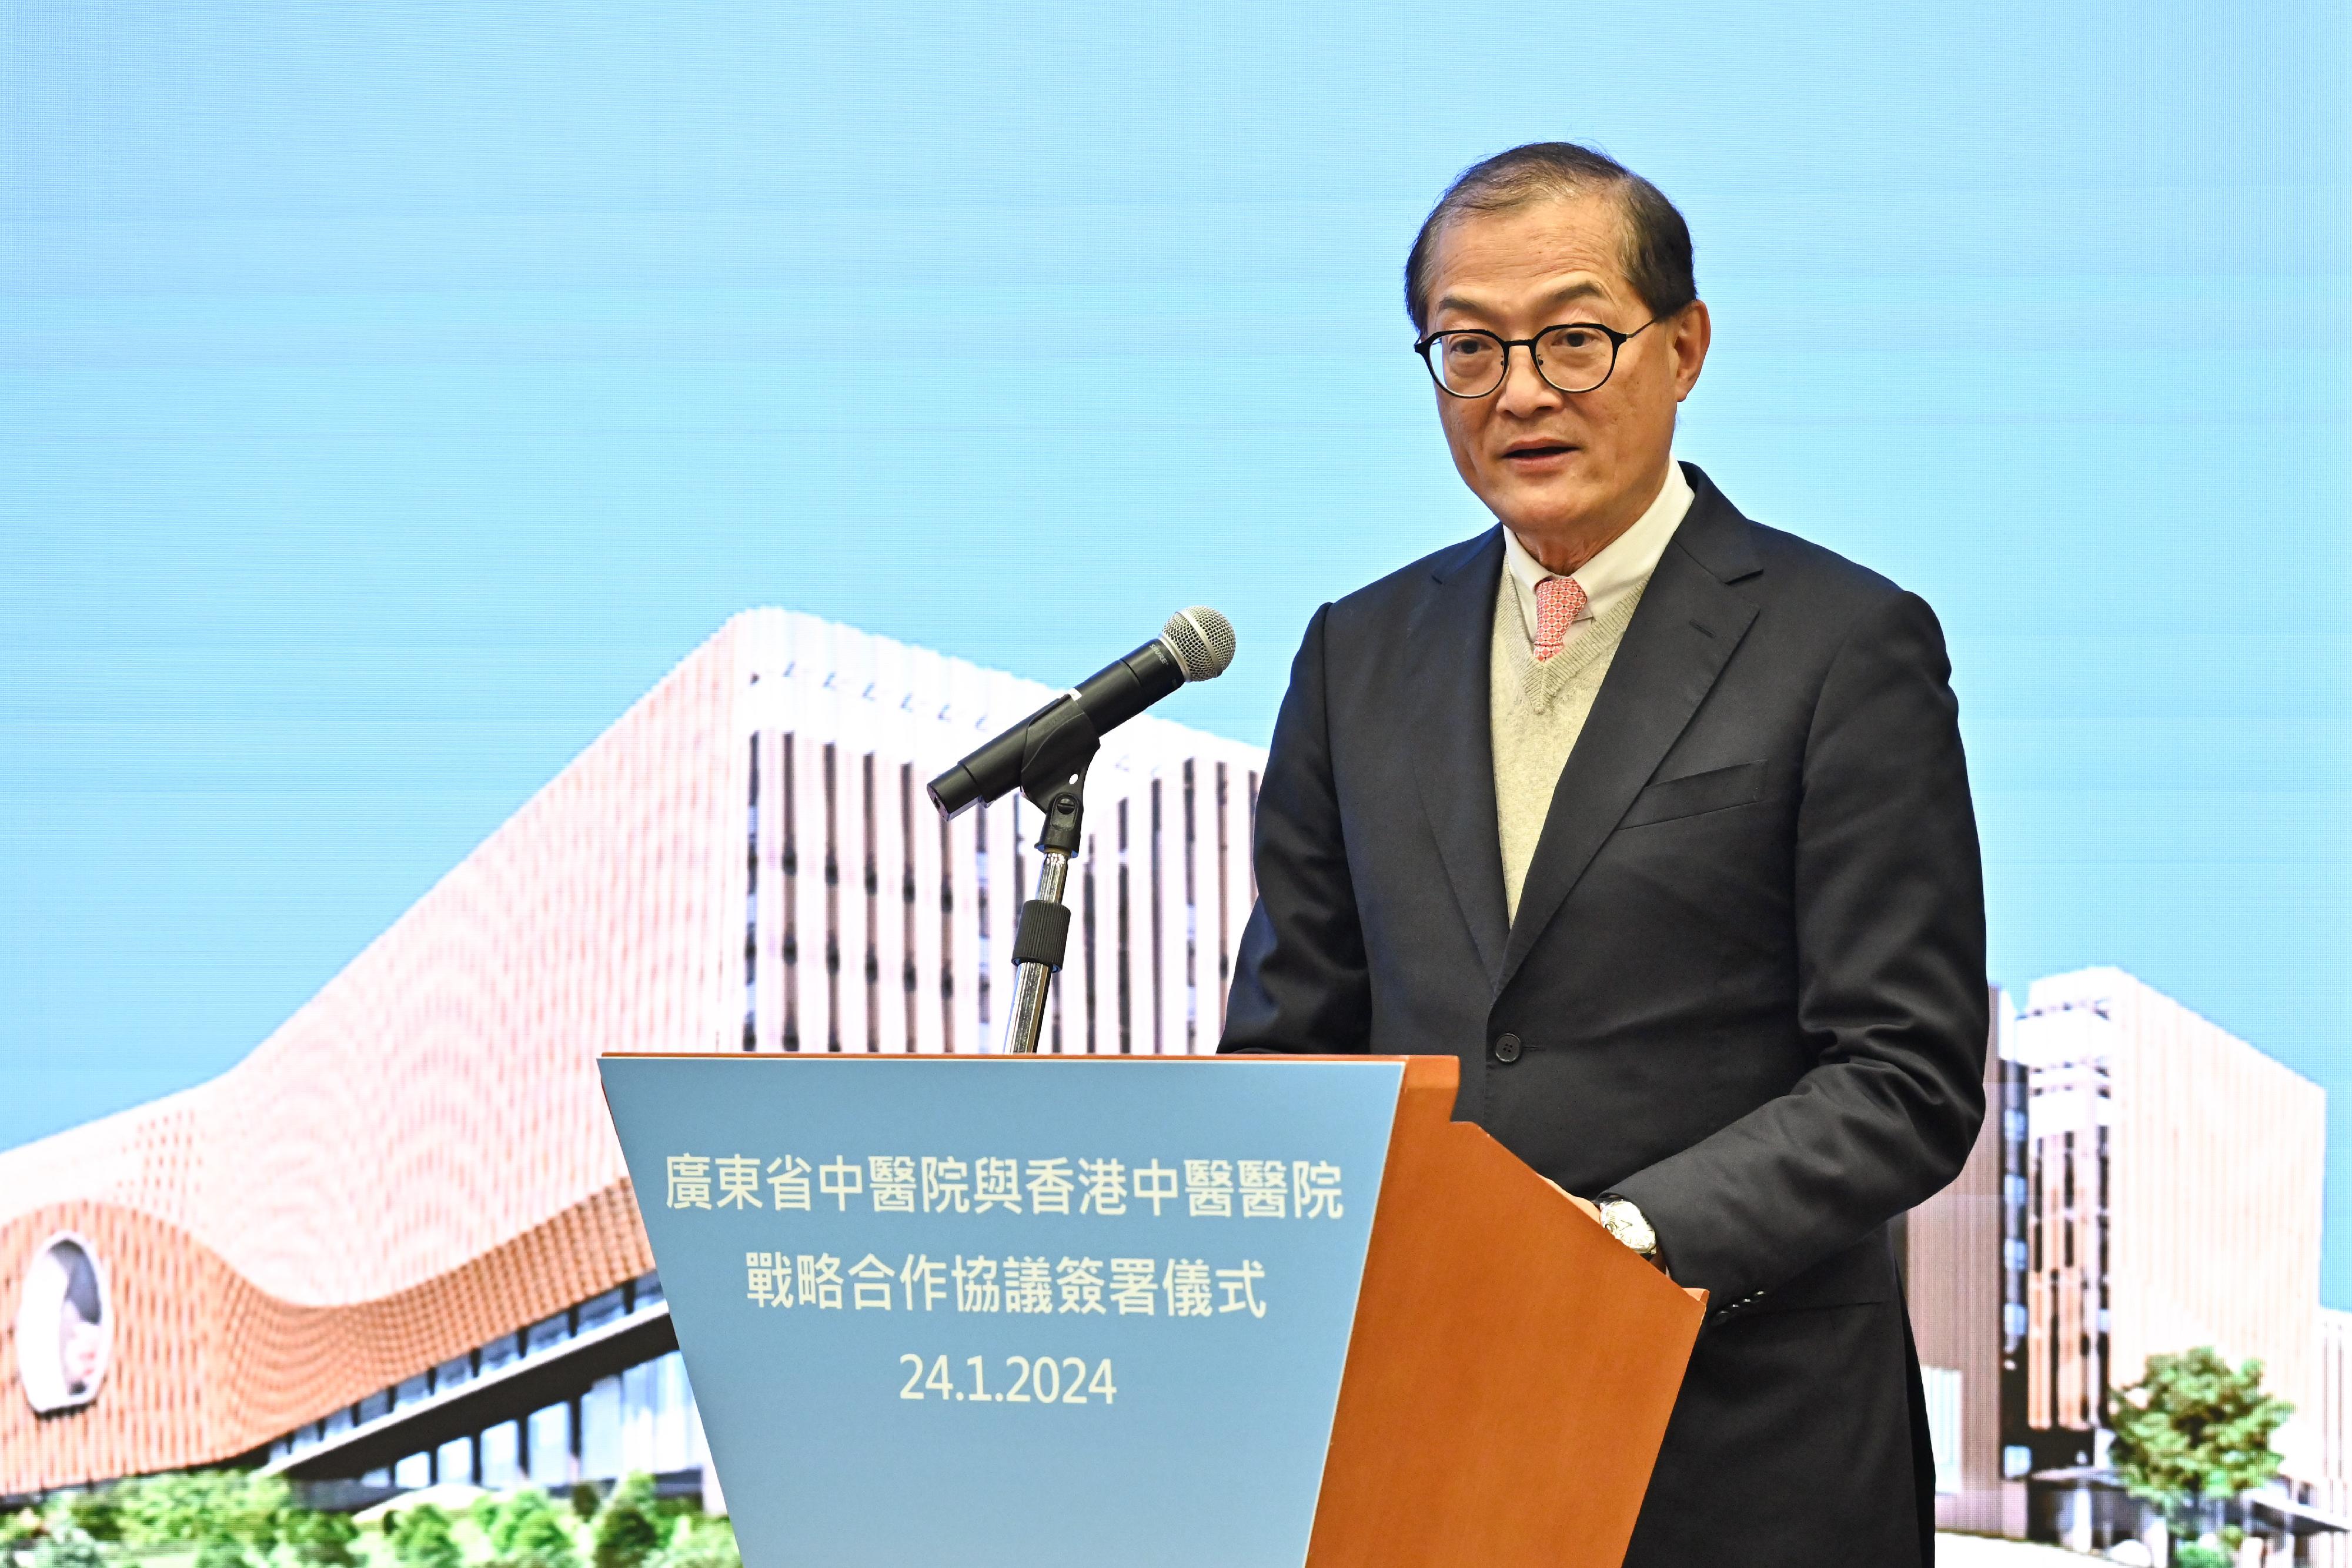 The Secretary for Health, Professor Lo Chung-mau, delivers a speech at the signing ceremony of the Strategic Collaboration Agreement between Guangdong Provincial Hospital of Traditional Chinese Medicine and Chinese Medicine Hospital of Hong Kong today (January 24).
